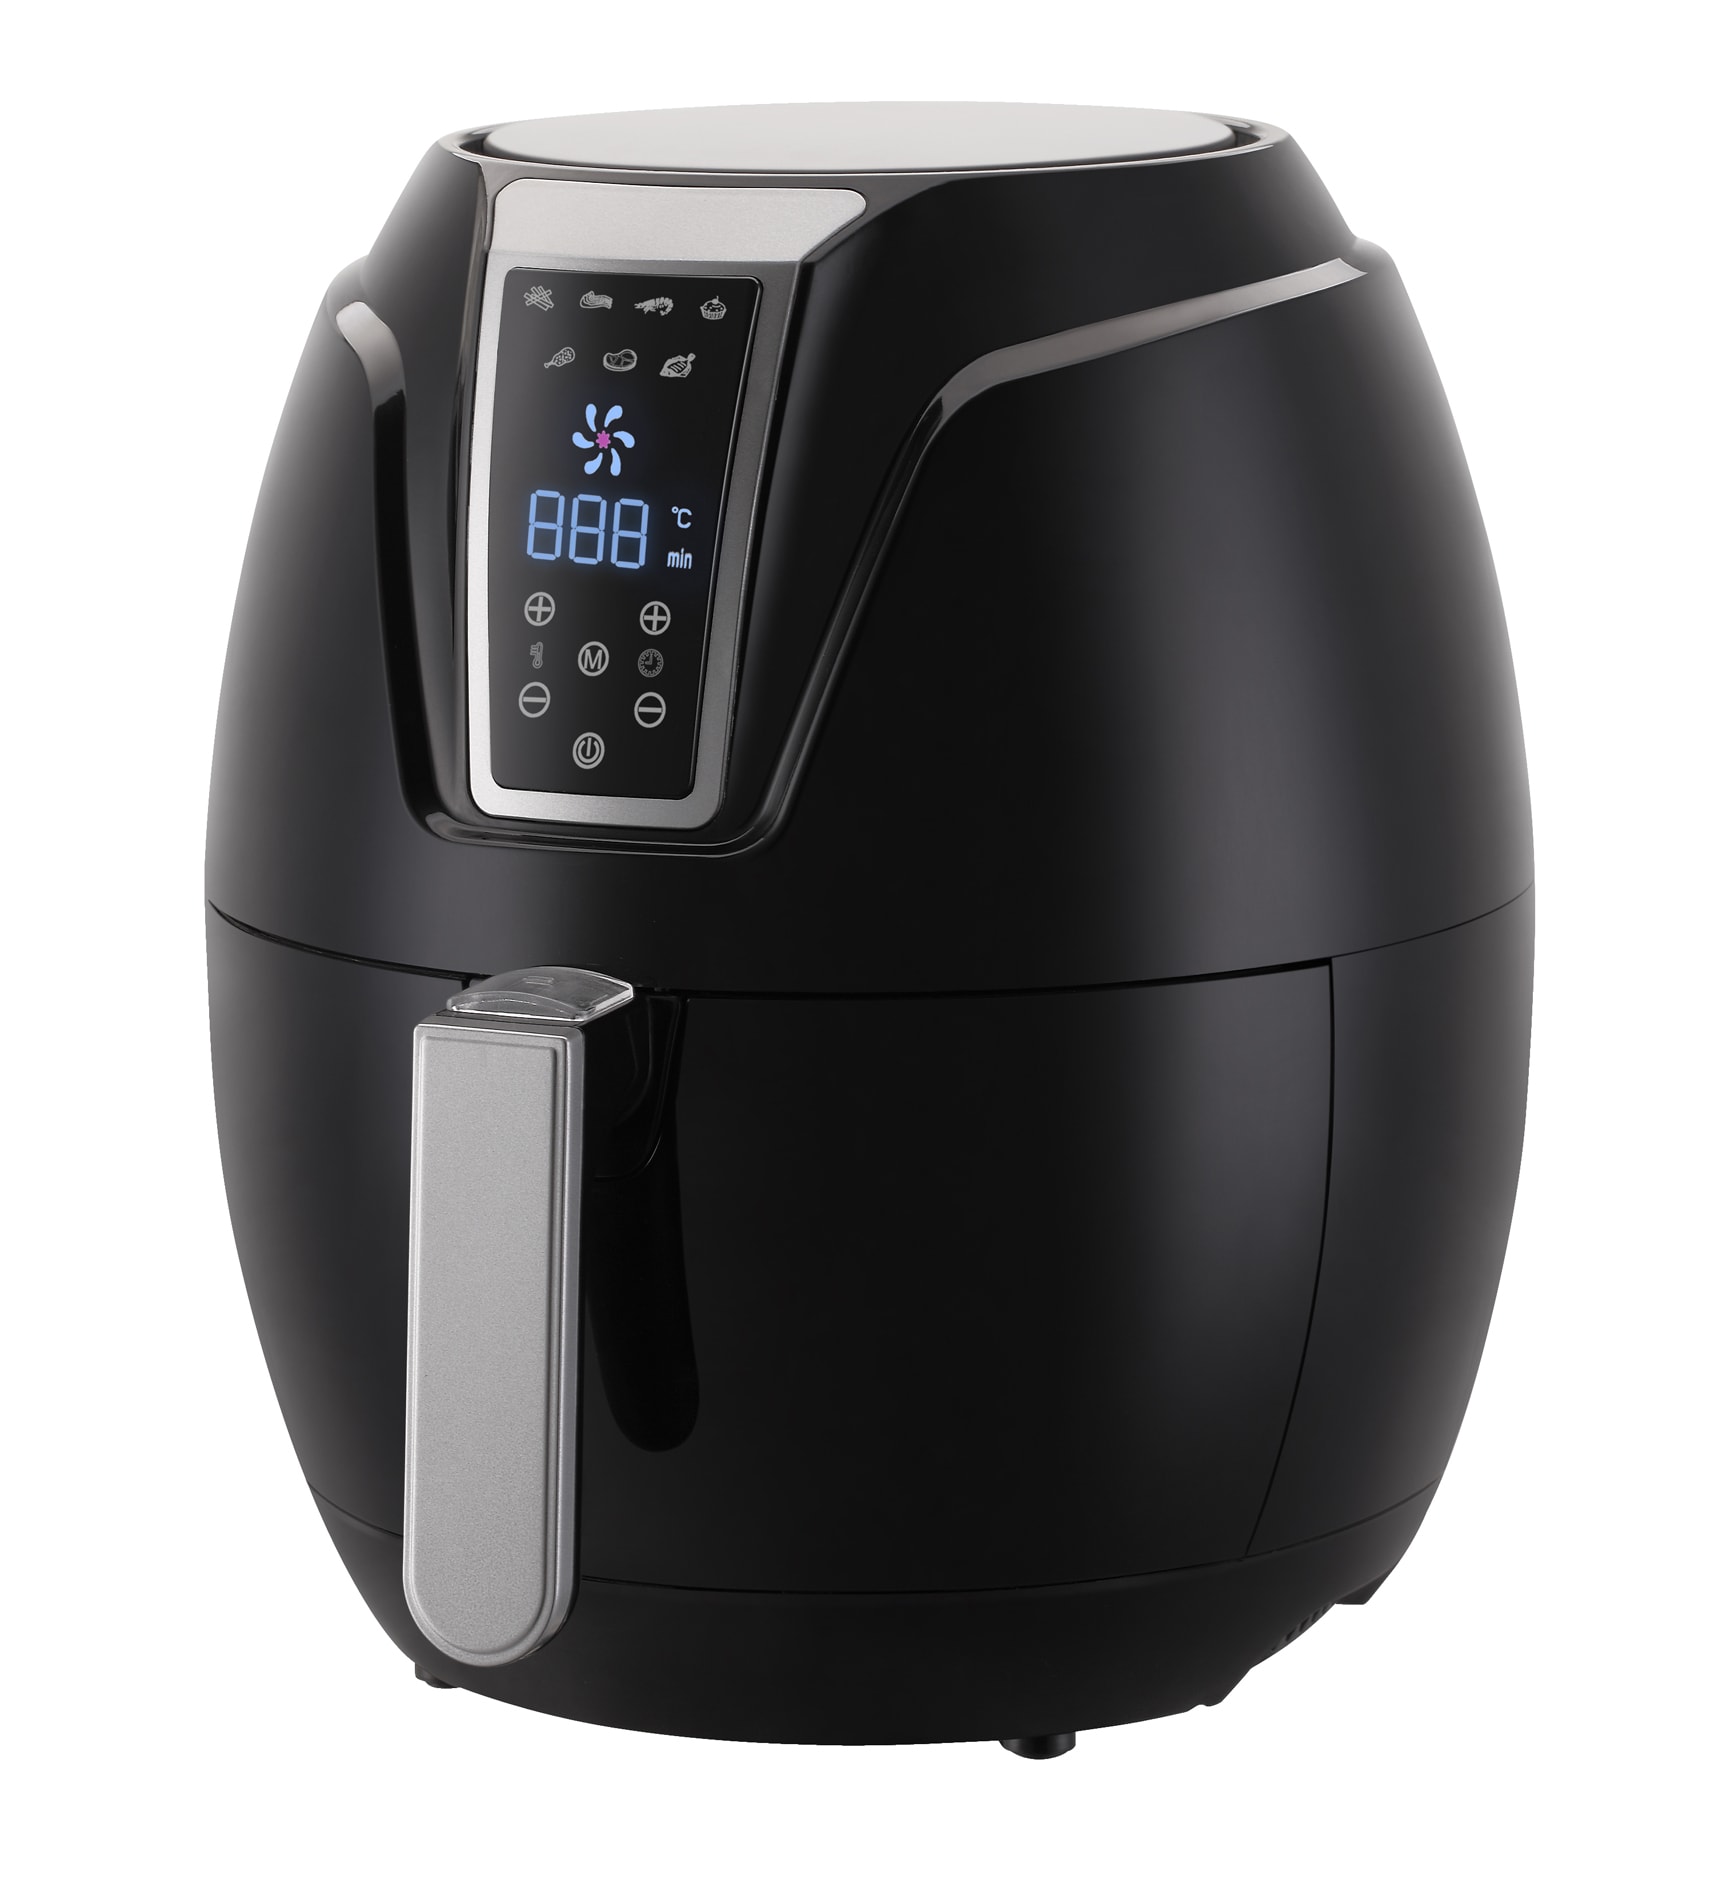 Emerald 5.2L Gray Air Fryer with Digital LED Touch Display, Removable Basket,  and 1800W Power - Programmable, Non-Stick, UL Listed in the Air Fryers  department at